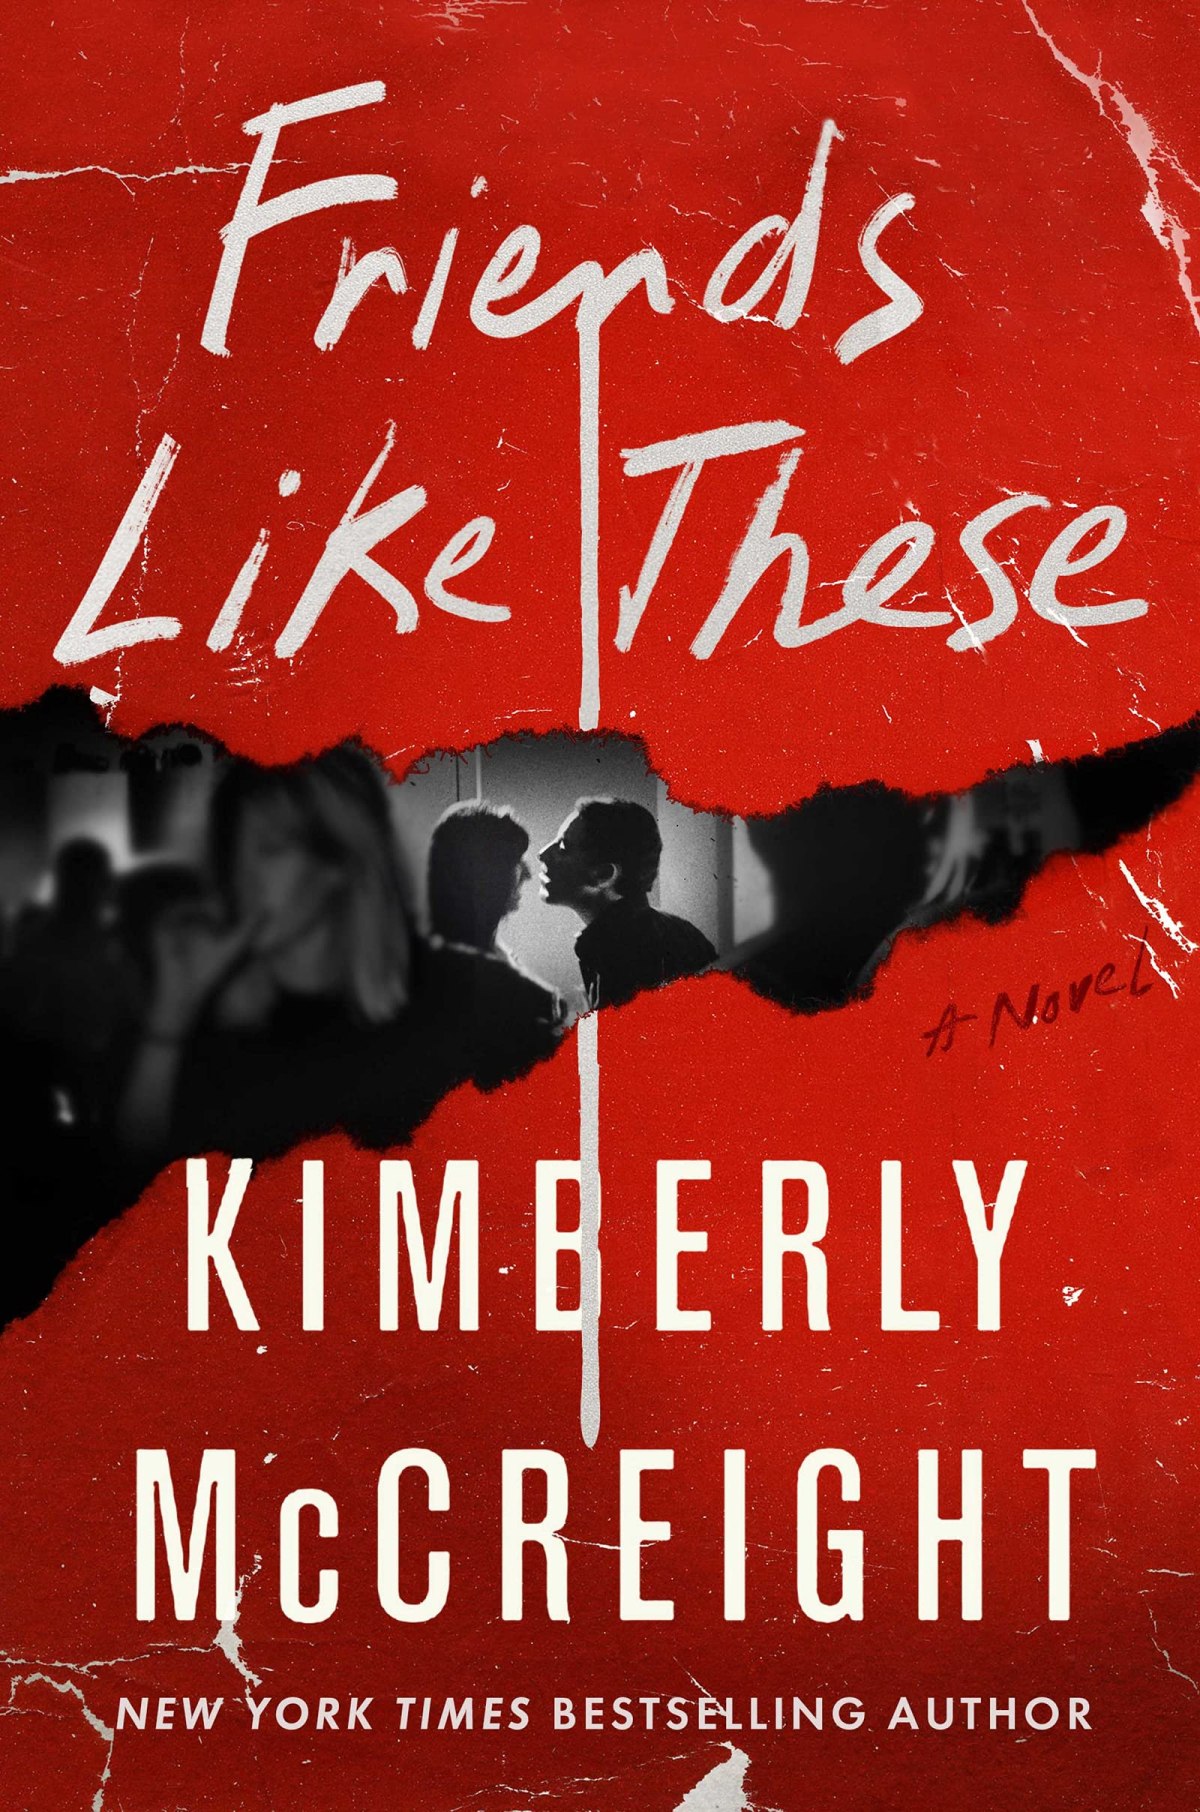 Book 164 – Friends Like These by Kimberly McCreight